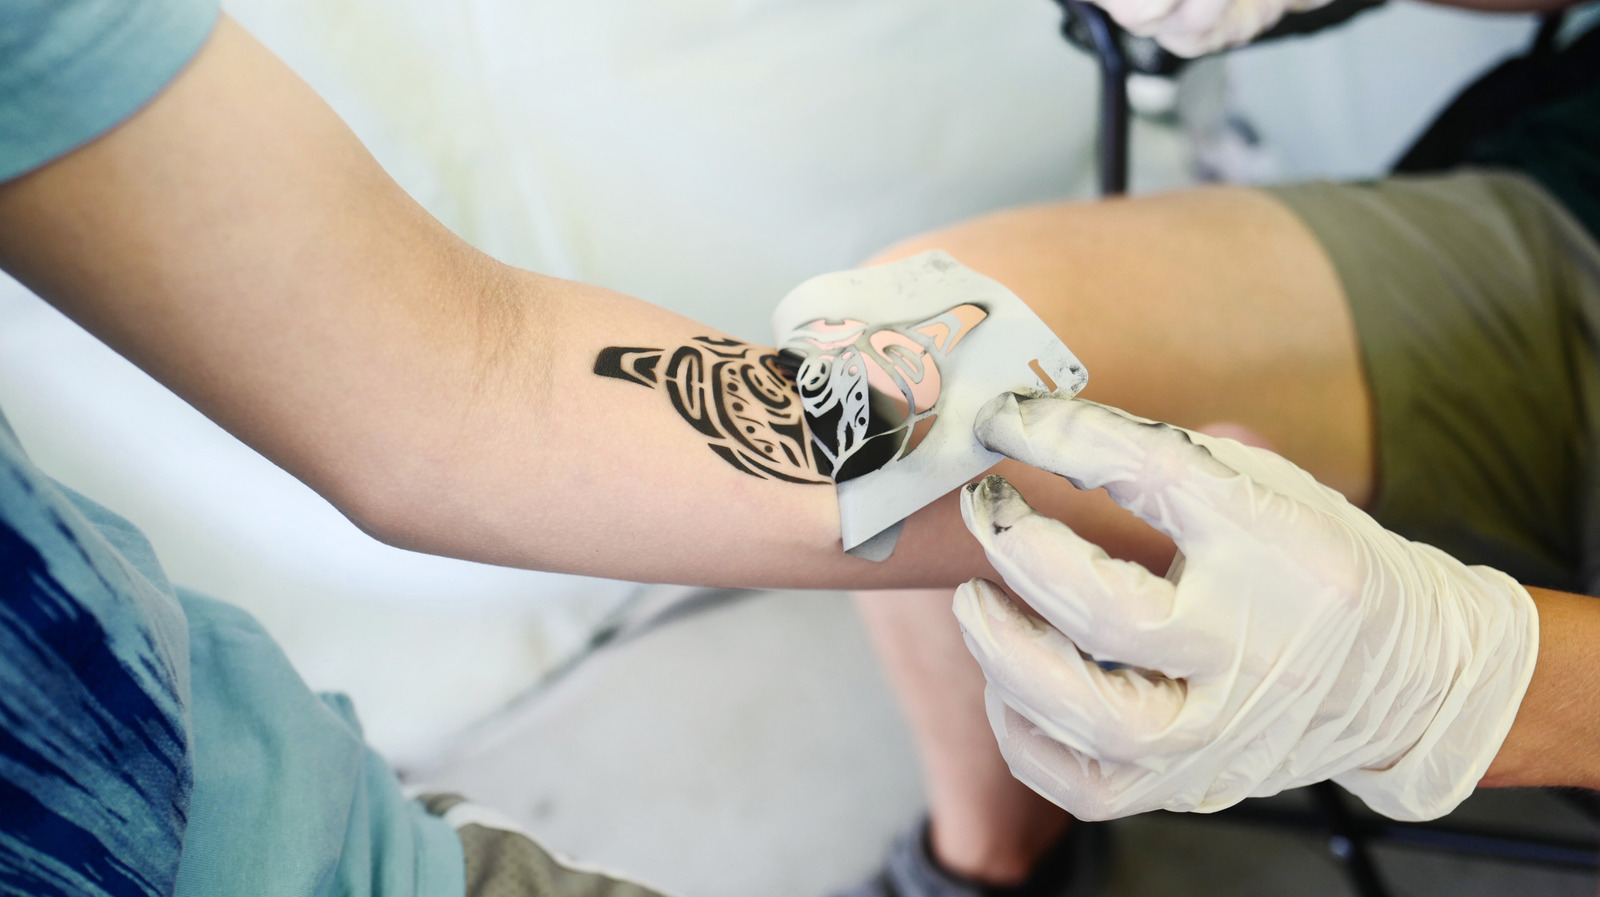 Get Perfectly Accurate Tattoos Every Time with Thermal Tattoo